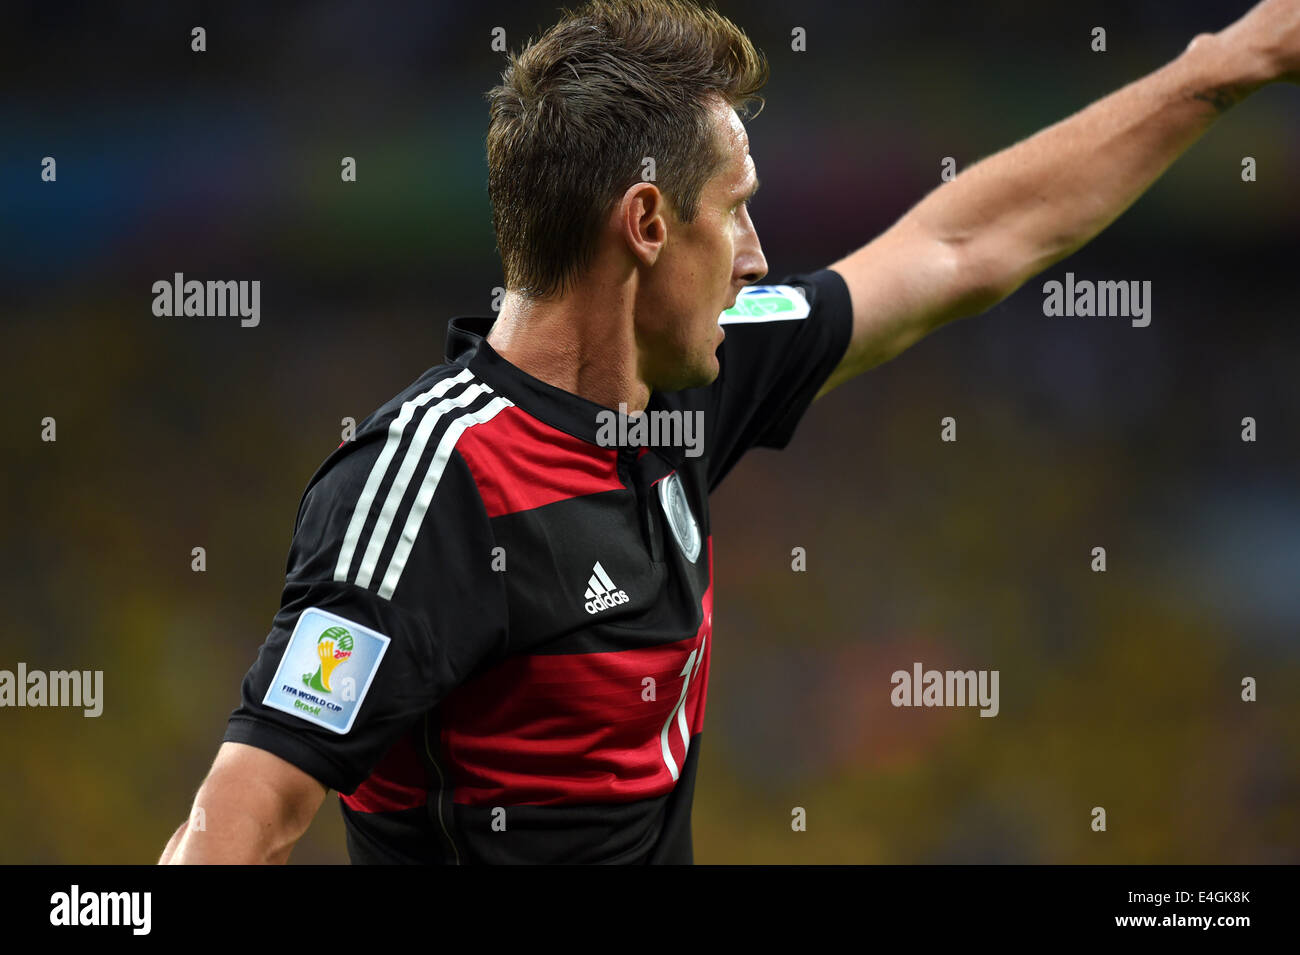 Belo Horizonte, Brazil. 8th July, 2014. Miroslav Klose (GER) Football/Soccer : Miroslav Klose of Germany celebrates after scoring his team's second goal during the FIFA World Cup Brazil 2014 Semi-finals match between Brazil 1-7 Germany at Estadio Mineirao in Belo Horizonte, Brazil . © FAR EAST PRESS/AFLO/Alamy Live News Stock Photo